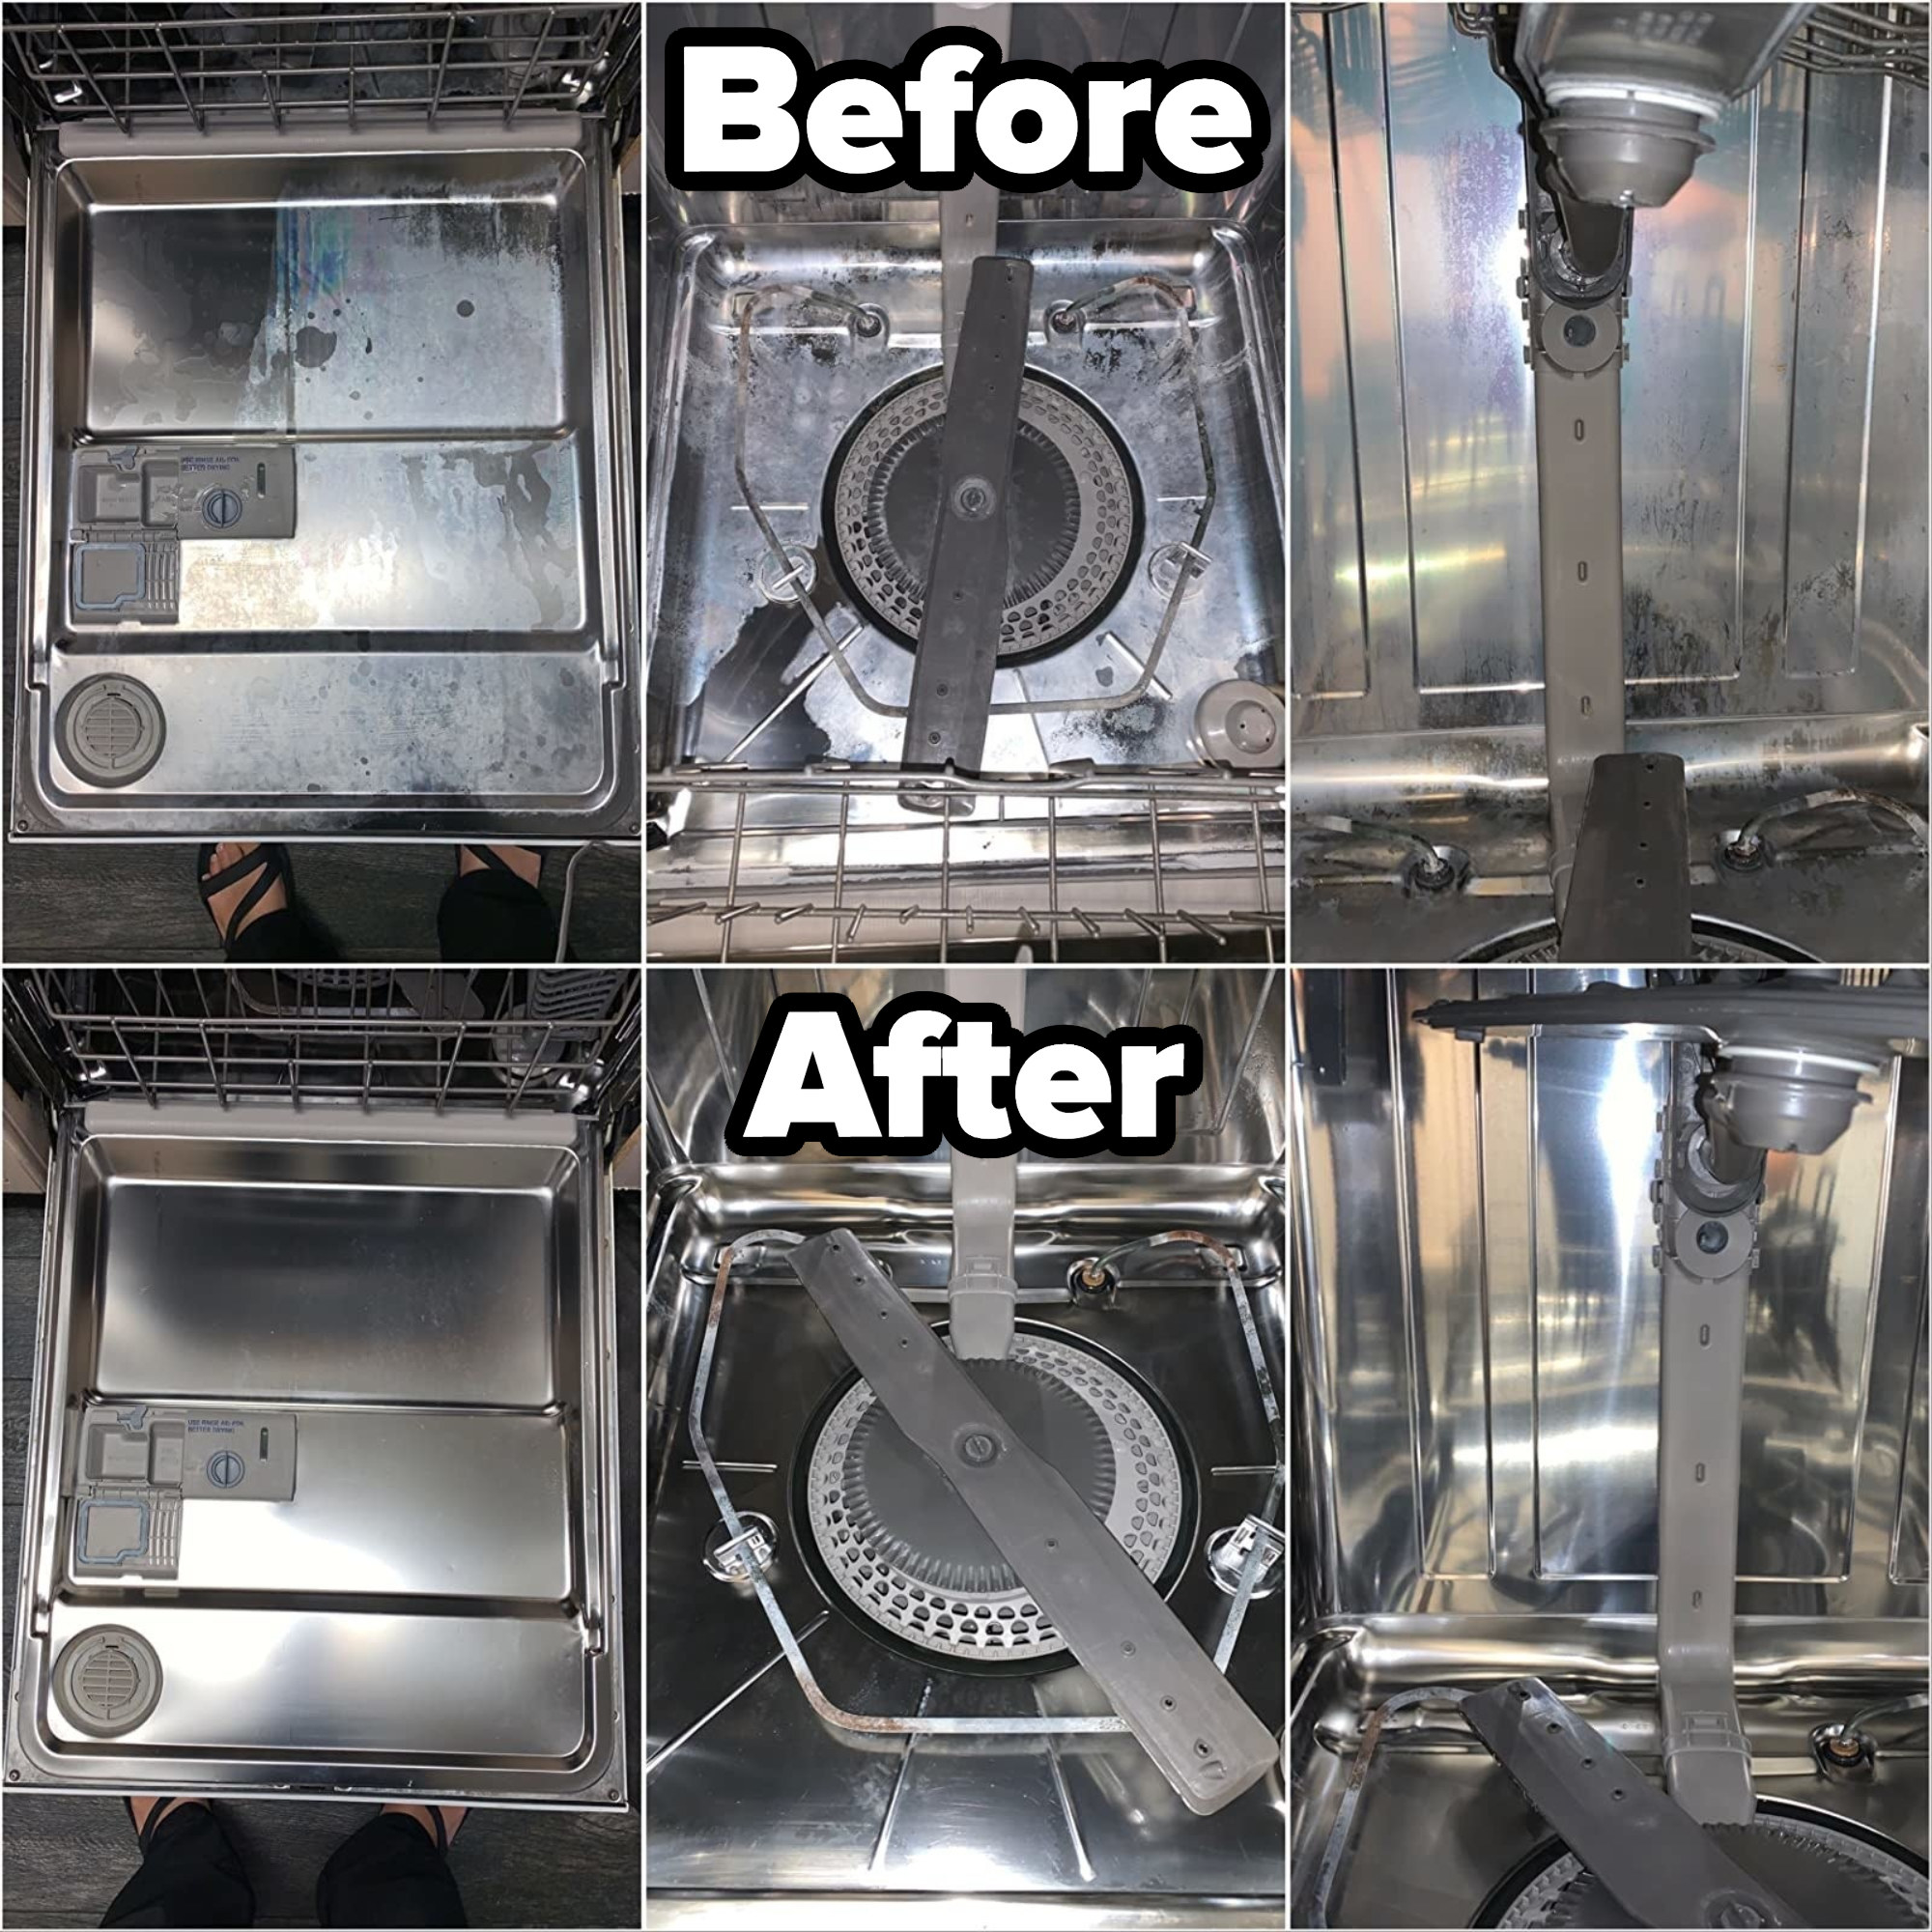 A reviewer&#x27;s dirty dishwasher before using the cleaner and after showing a cleaner dishwasher